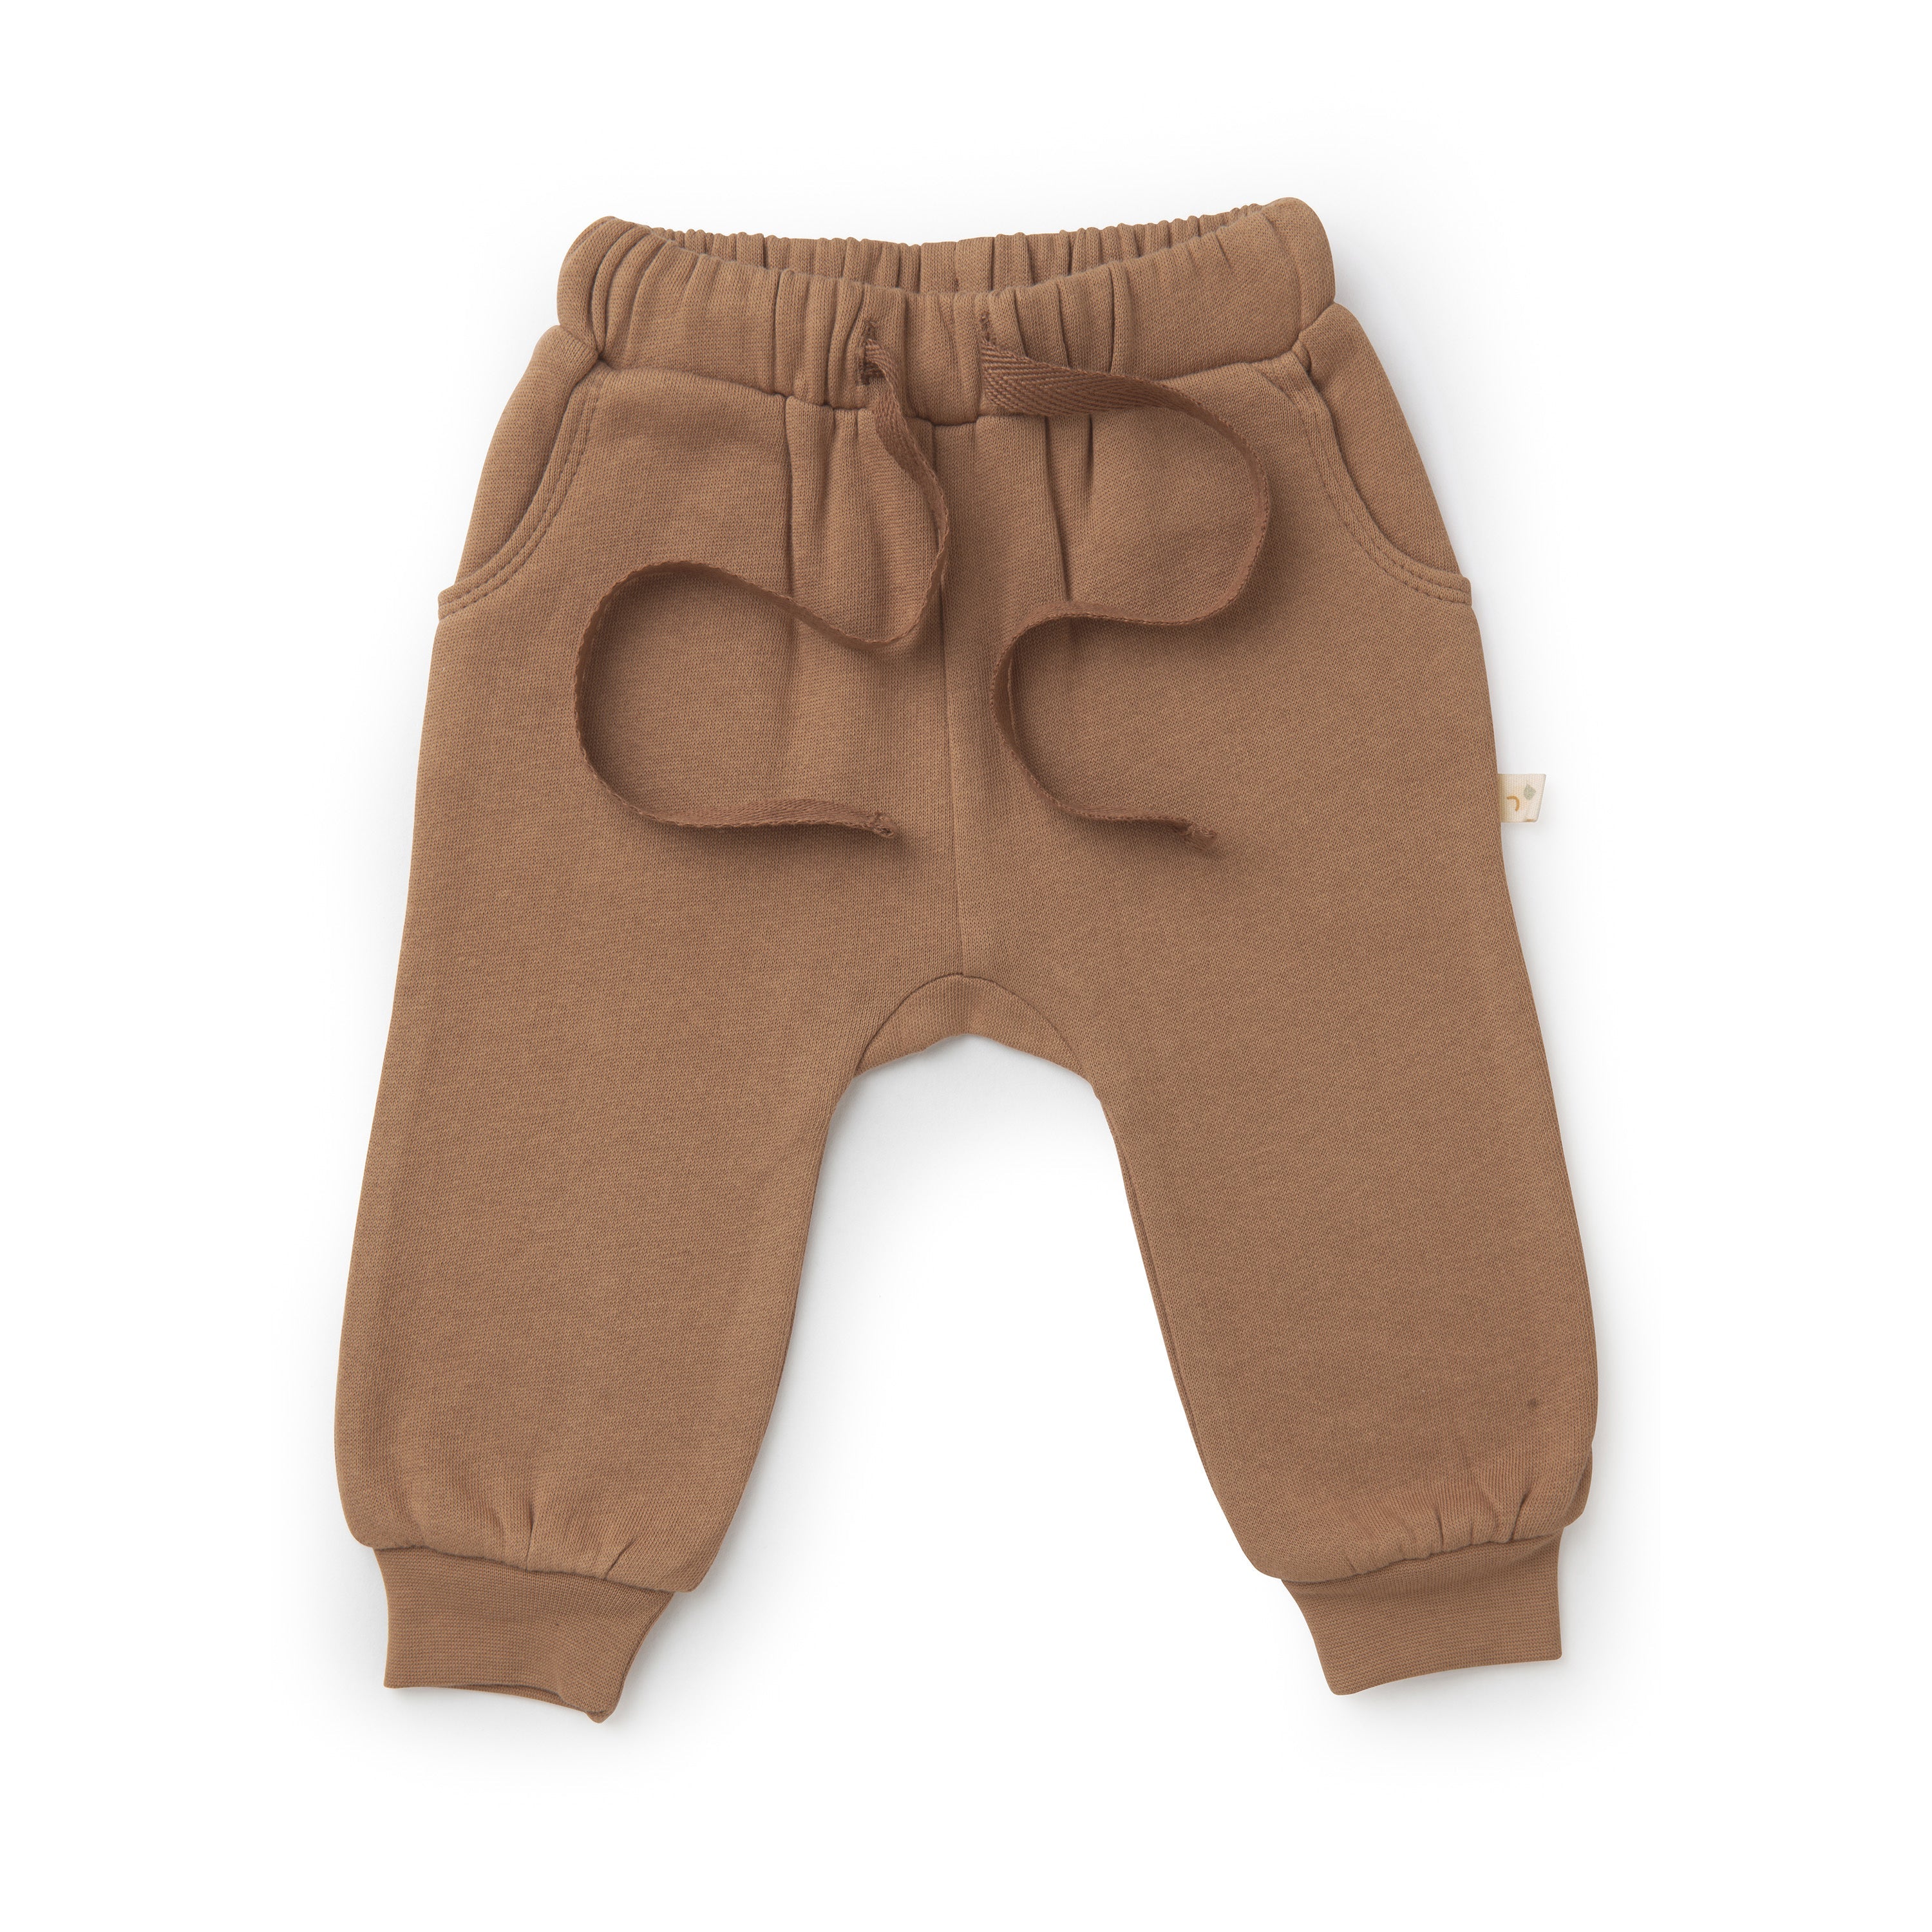 A pair of Organic Baby toddler's brown jogger pants in cocoa with an elastic waistband and ribbed cuffs, featuring round patch pockets on the front. The garment is displayed isolated on a white background.